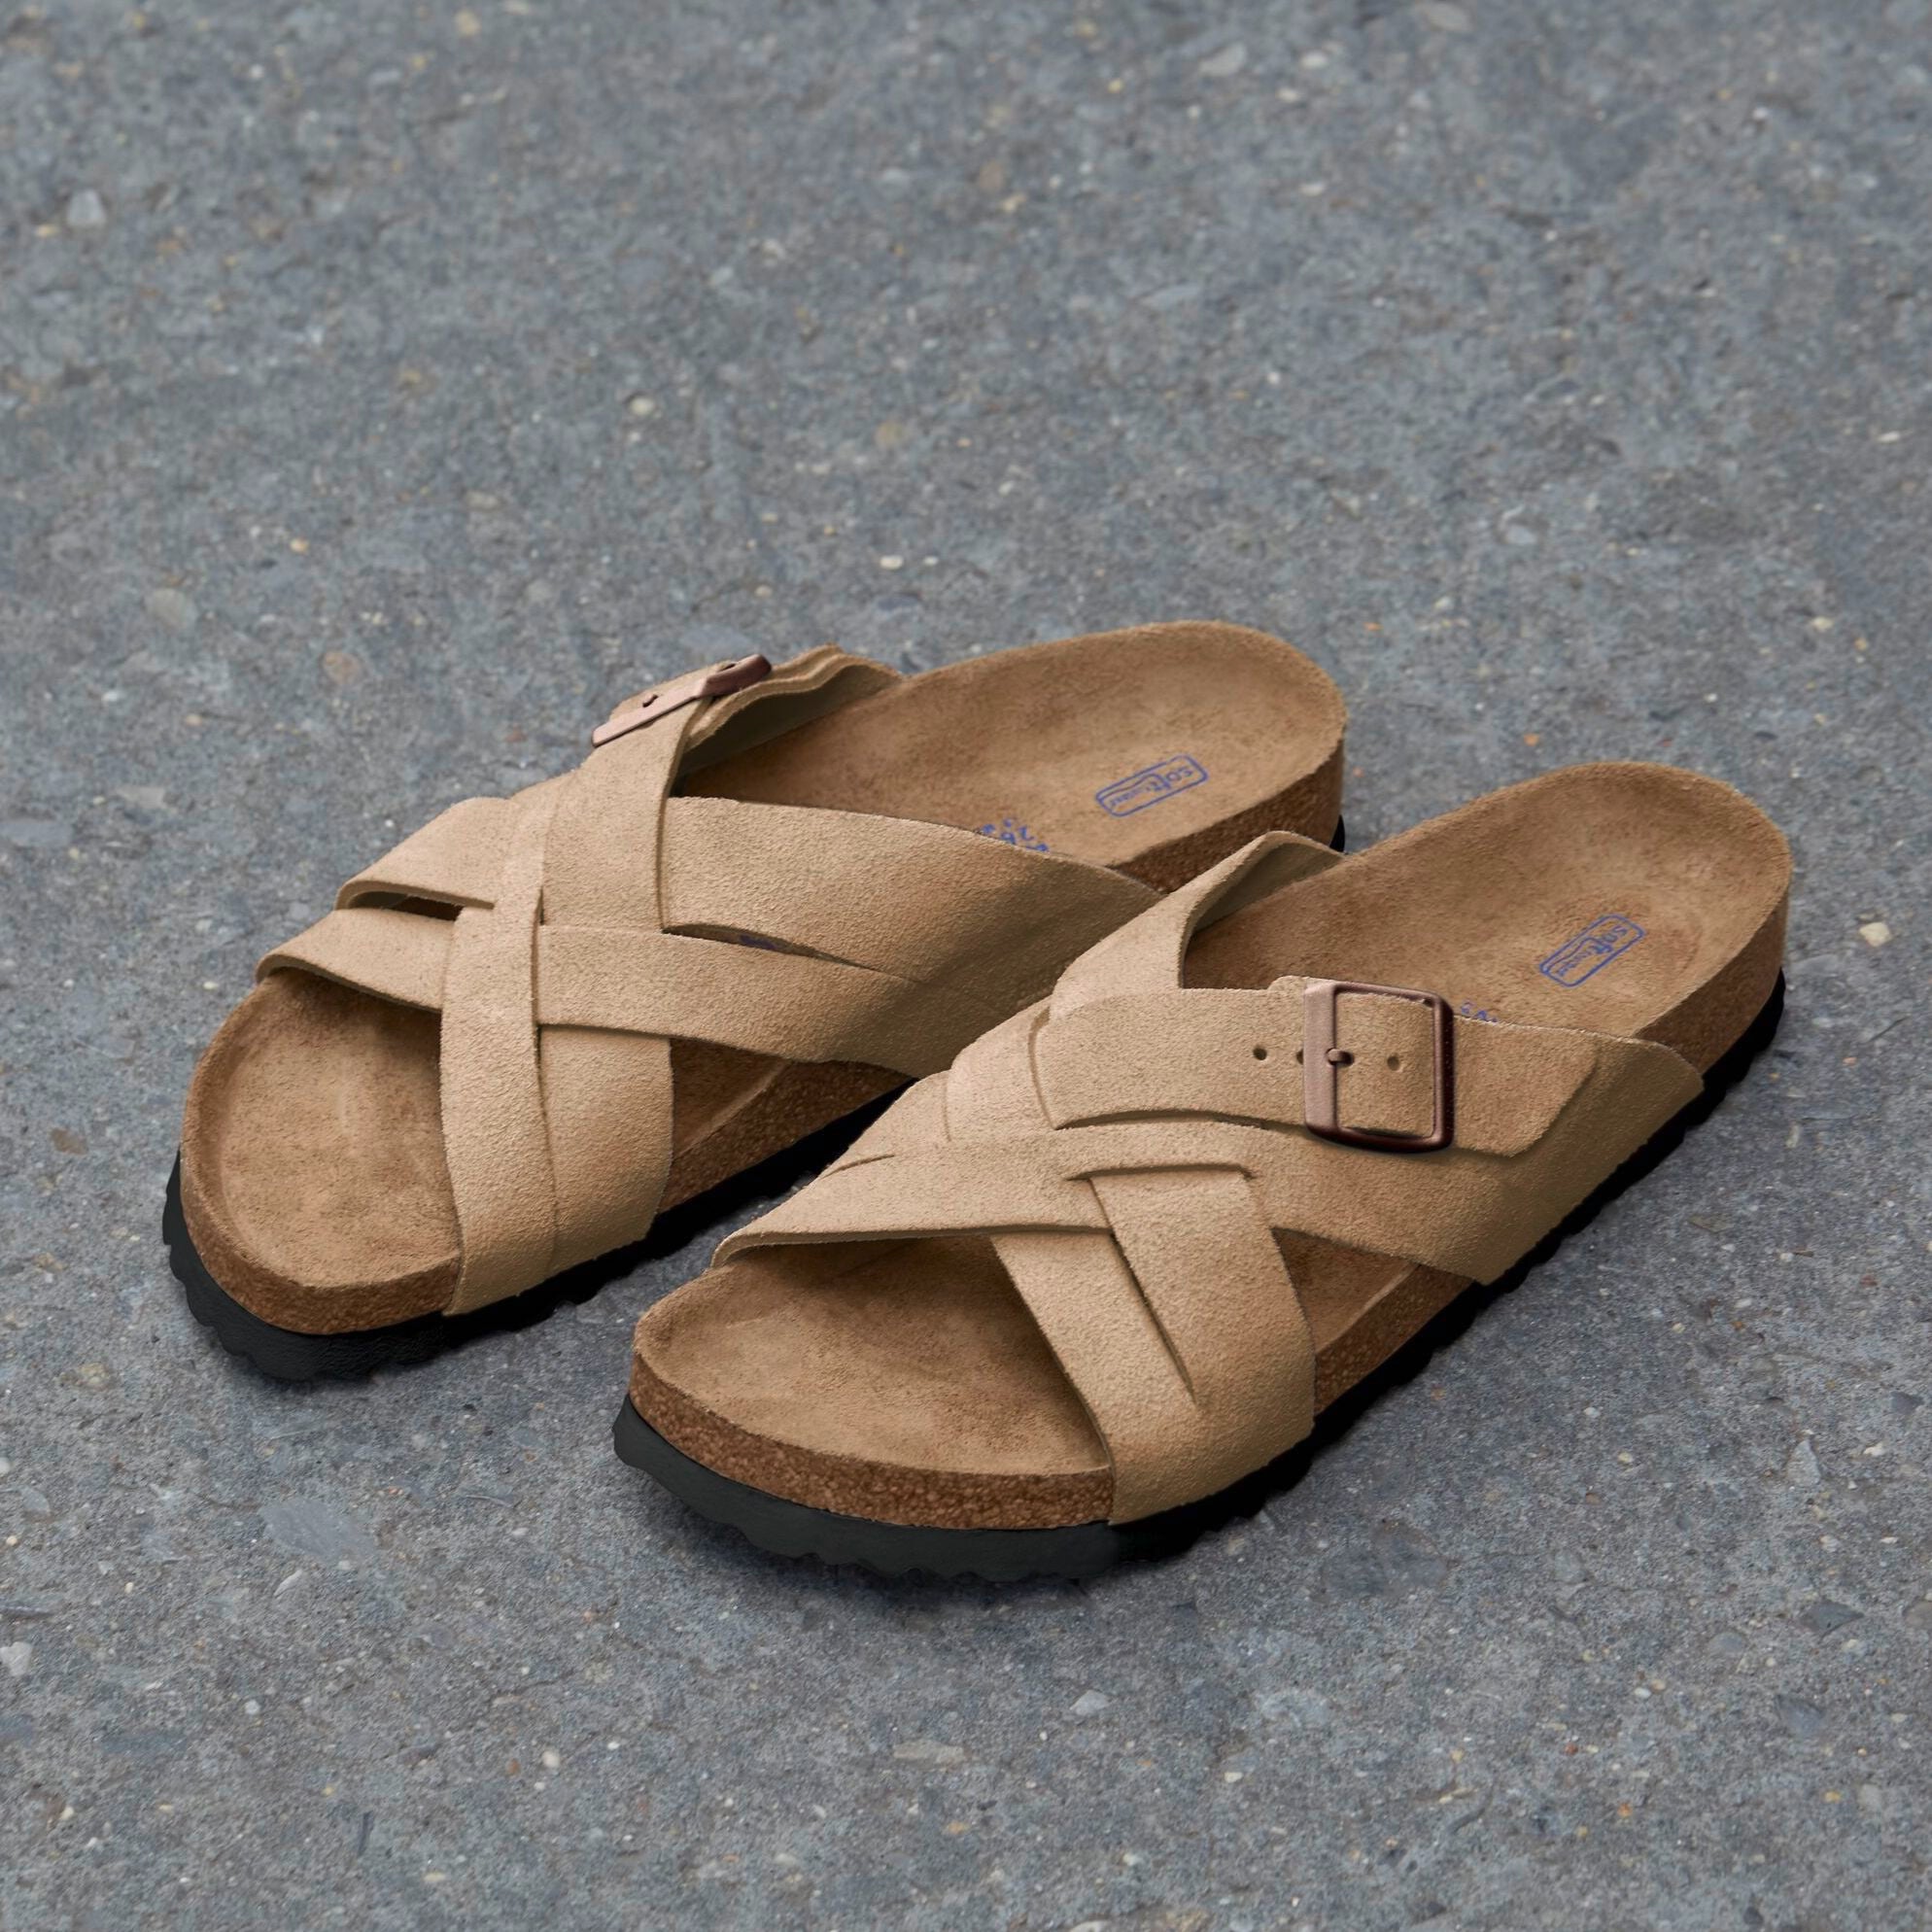 Birkenstock Limited Edition Lugano Soft Footbed taupe suede